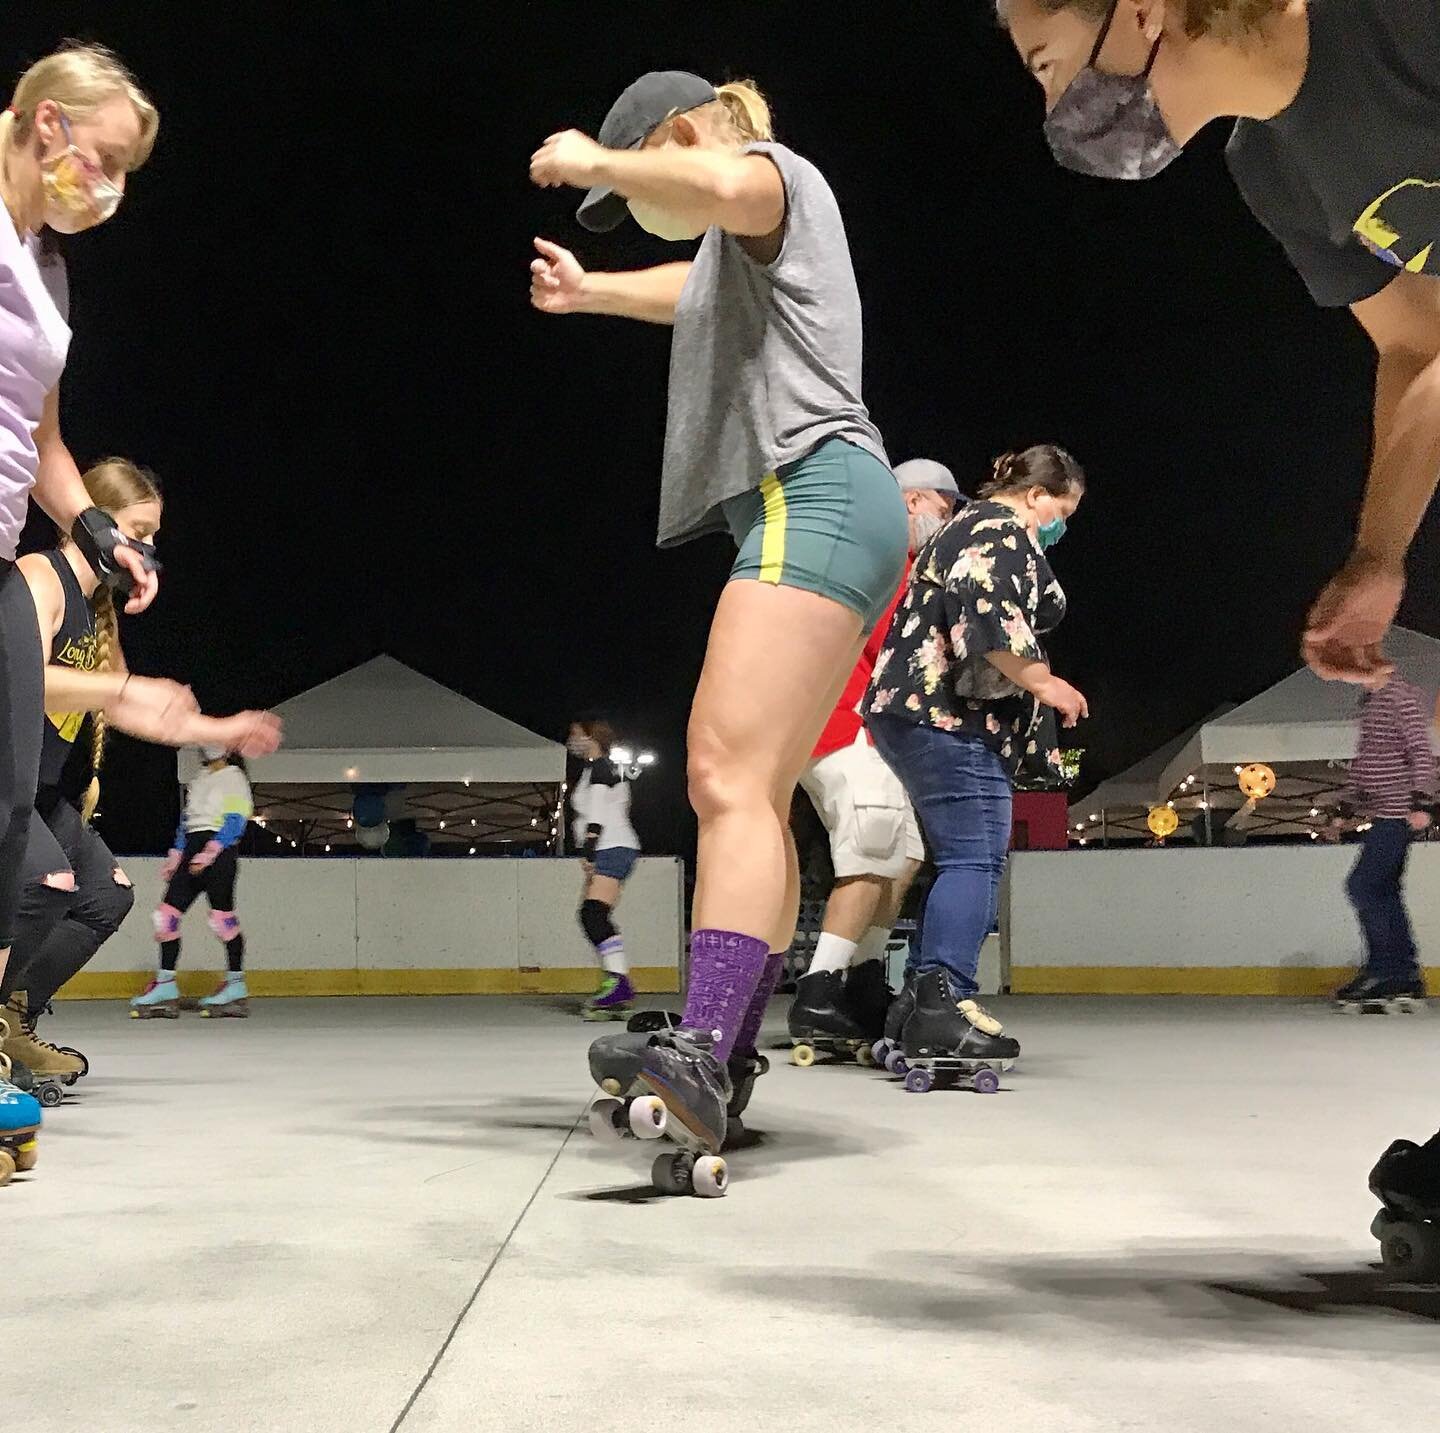 Tonight at 6:00 Emily @oops.rupes is teaching Intermediate Dance Skating at @sandiegoderbyunited ! Get your spot at https://derbyunited.com/schedule !!